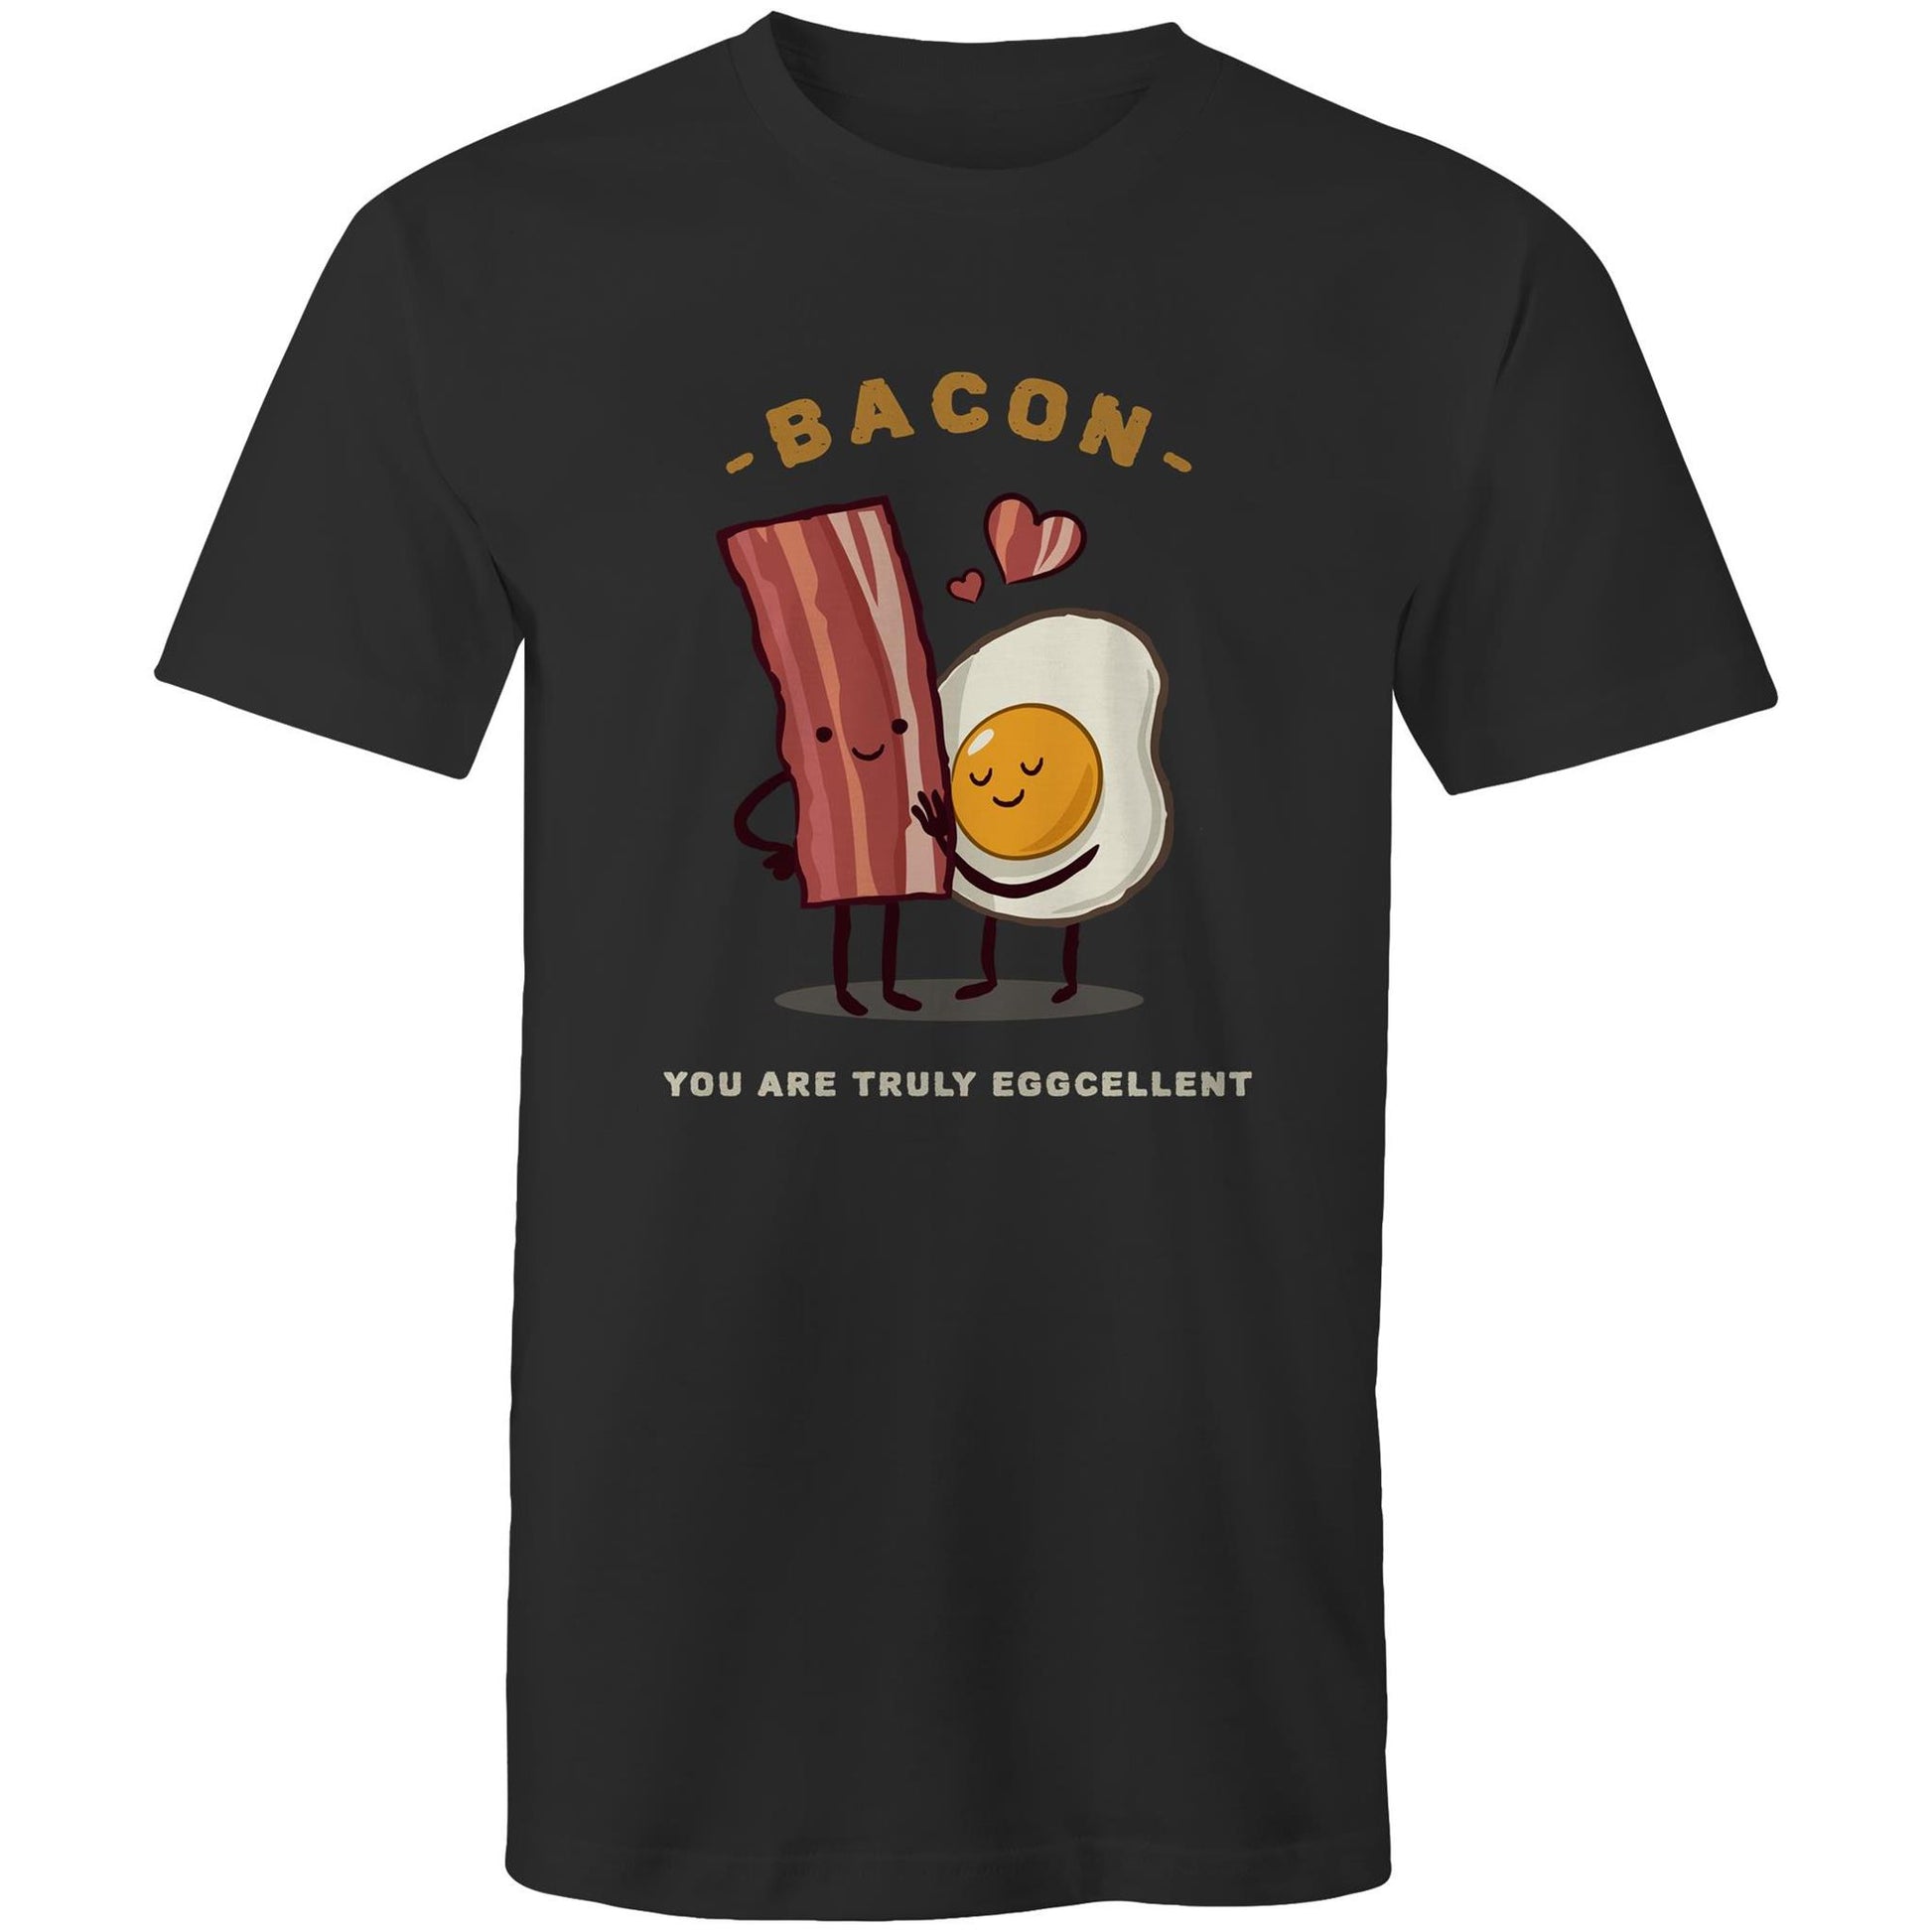 Bacon, You Are Truly Eggcellent - Mens T-Shirt Black Mens T-shirt Food